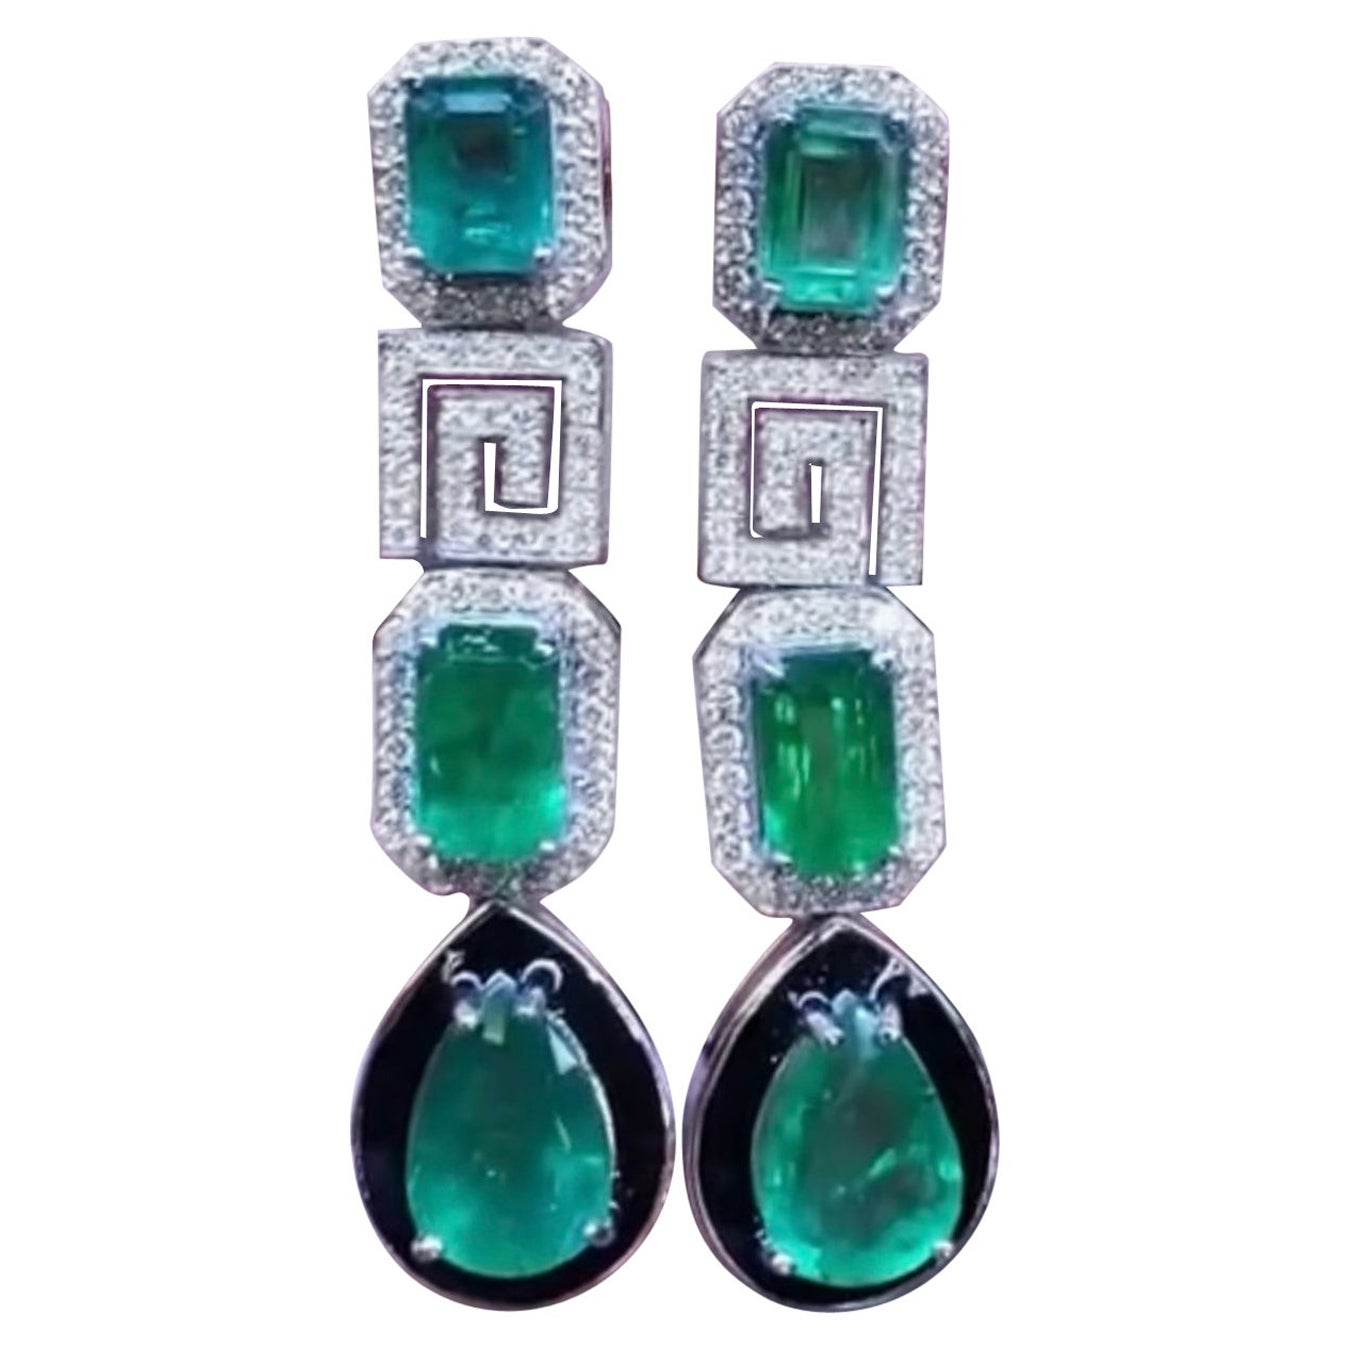 Gorgeous Ct 13, 79 of Zambia Emeralds and Diamonds on Earrings For Sale